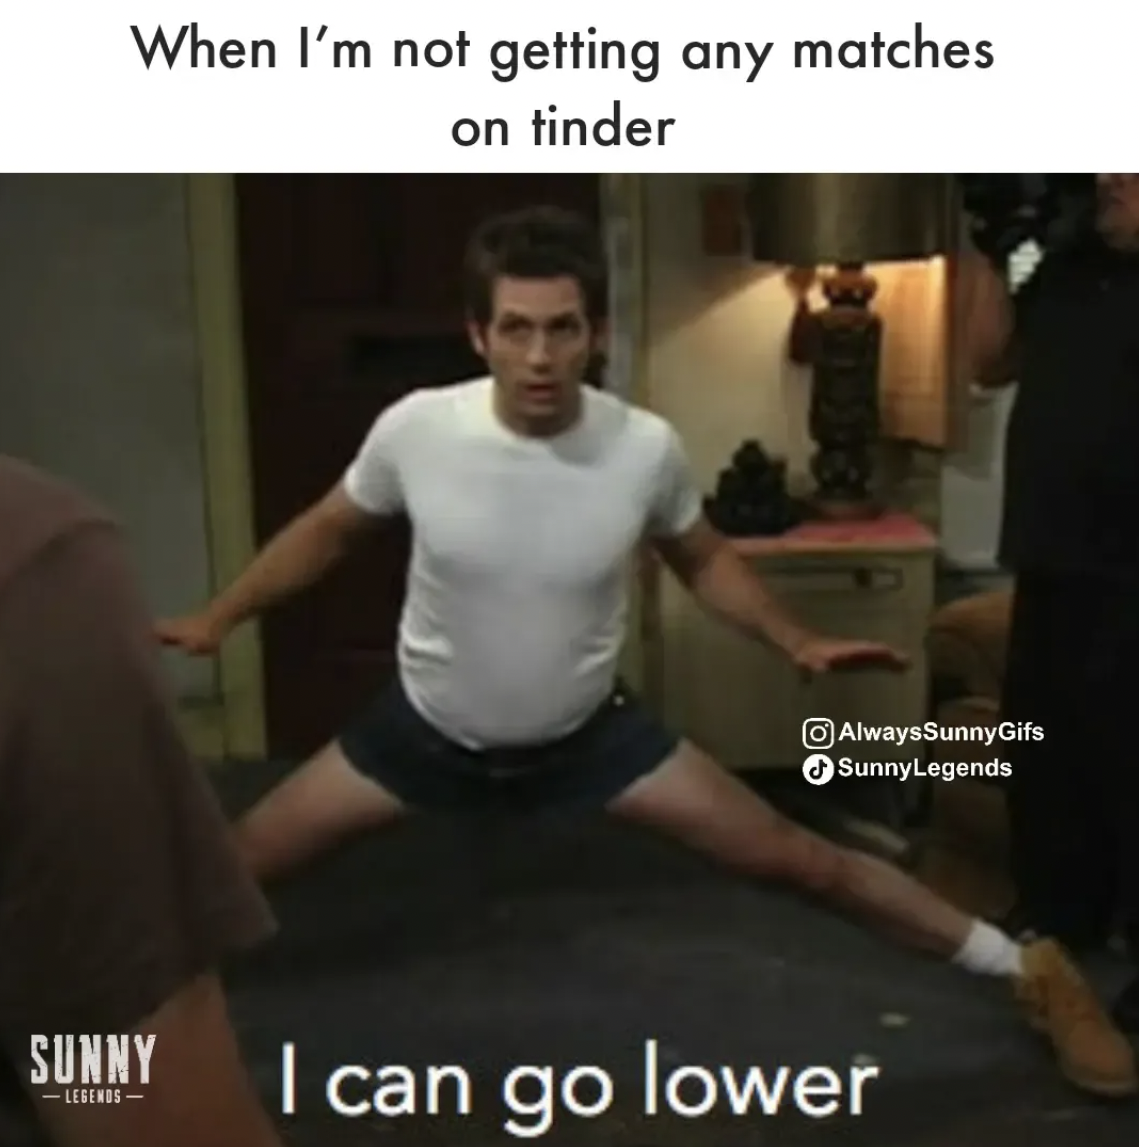 It's Always Sunny in Philadelphia memes - tommy batchelor - When I'm not getting any matches on tinder Sunny